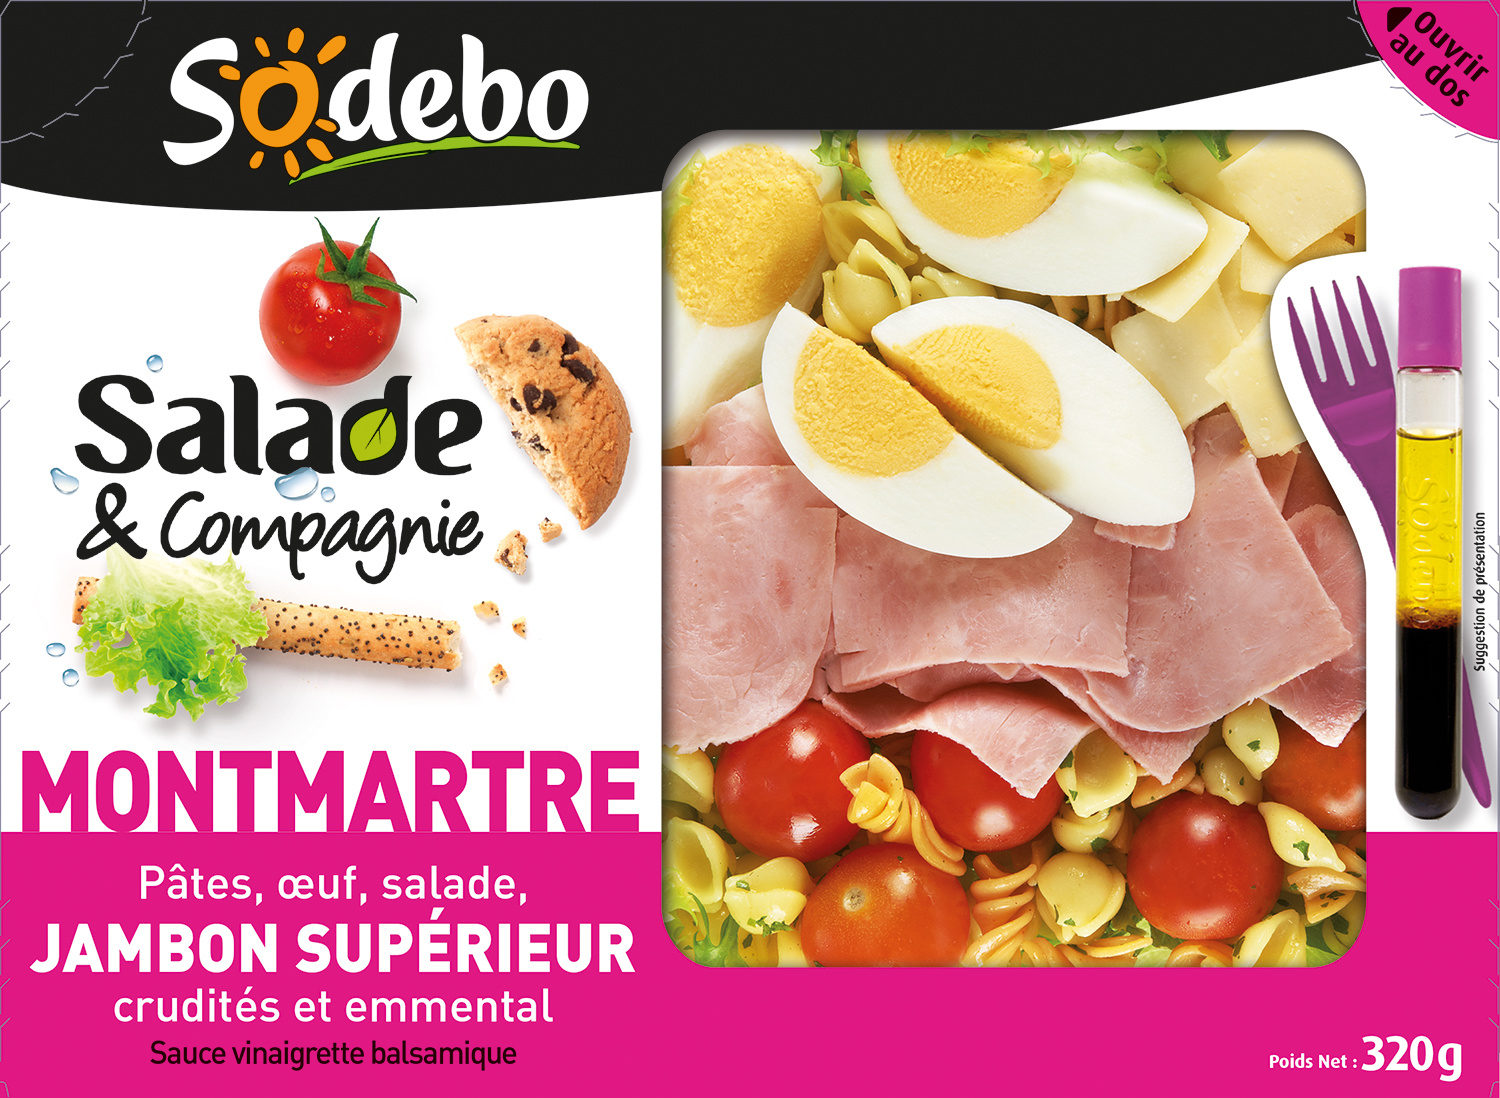 Salade & Compagnie - Montmartre - Product - fr